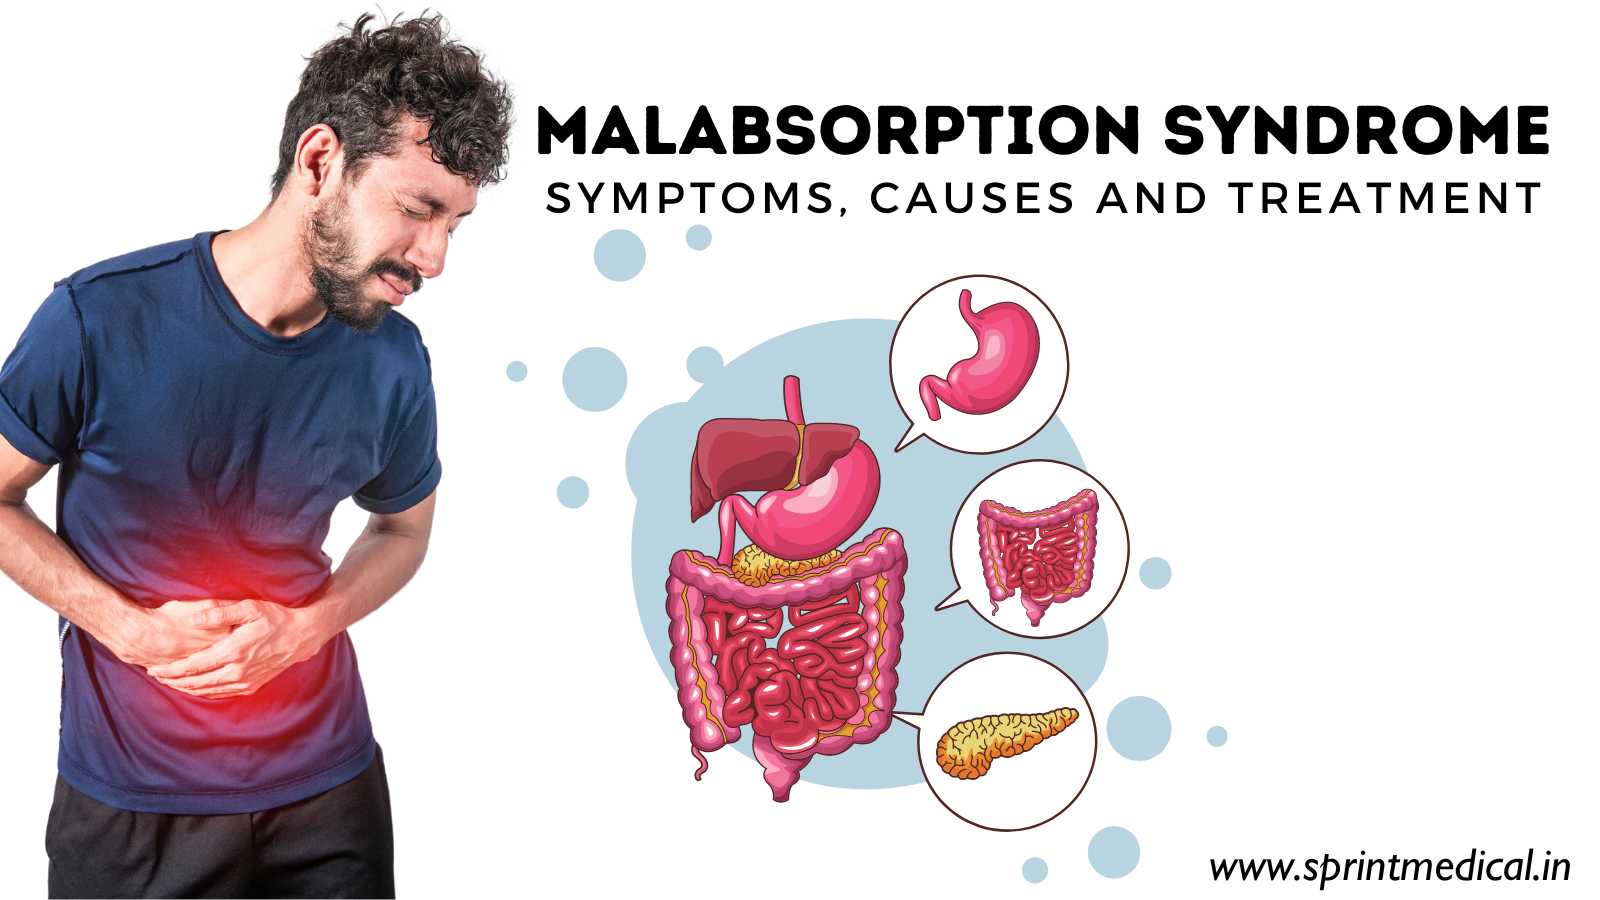 Malabsorption Syndrome Symptoms, Causes and Treatment